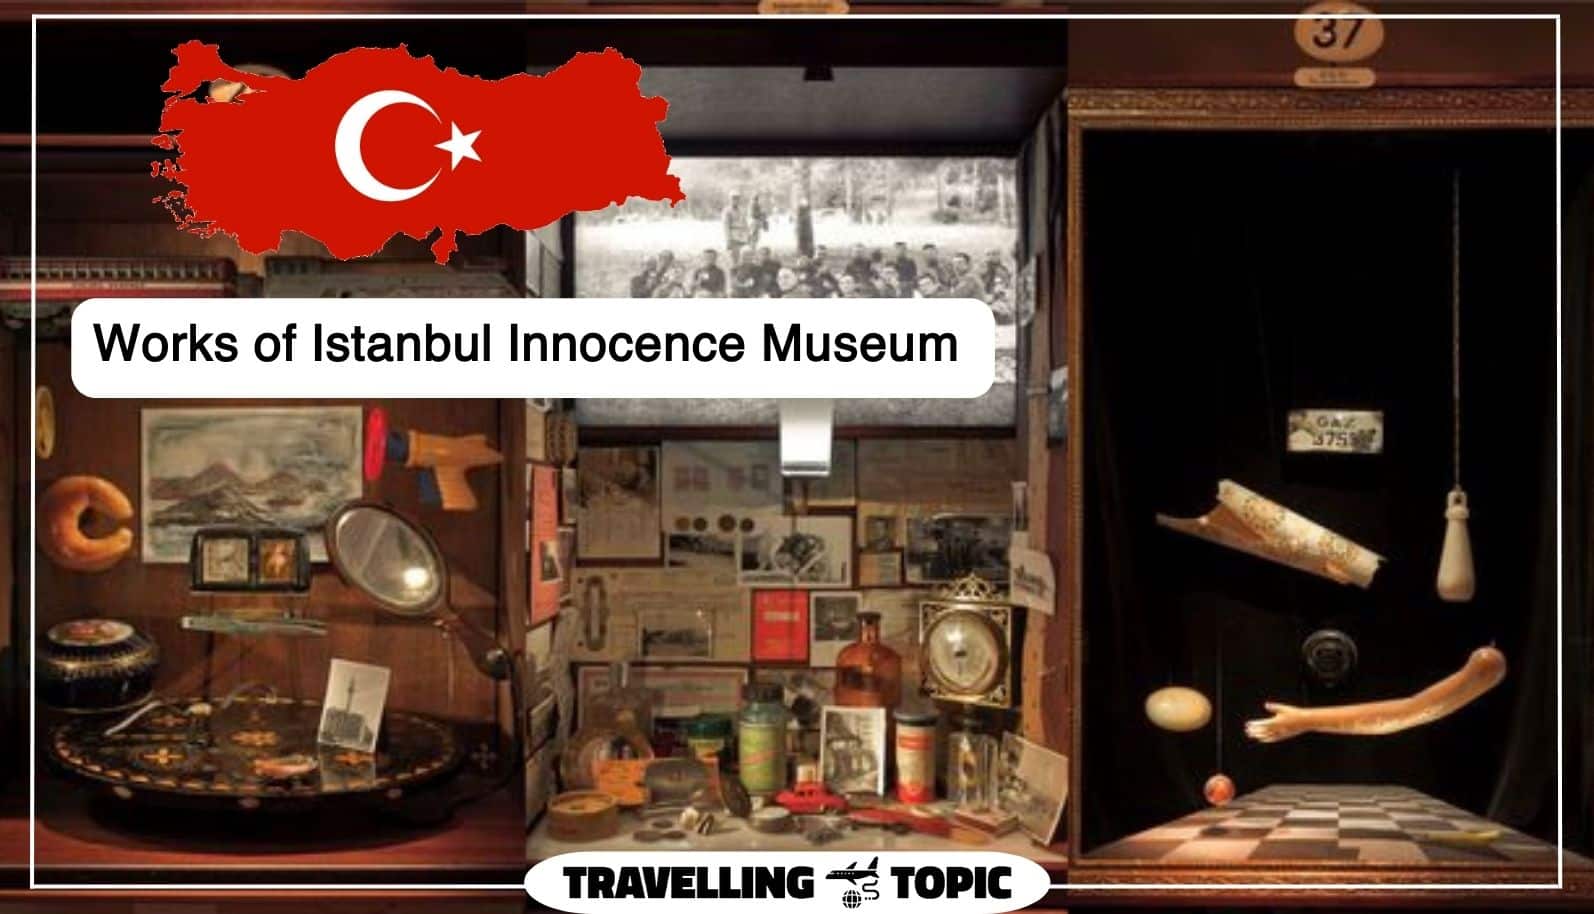 Works of Istanbul Innocence Museum